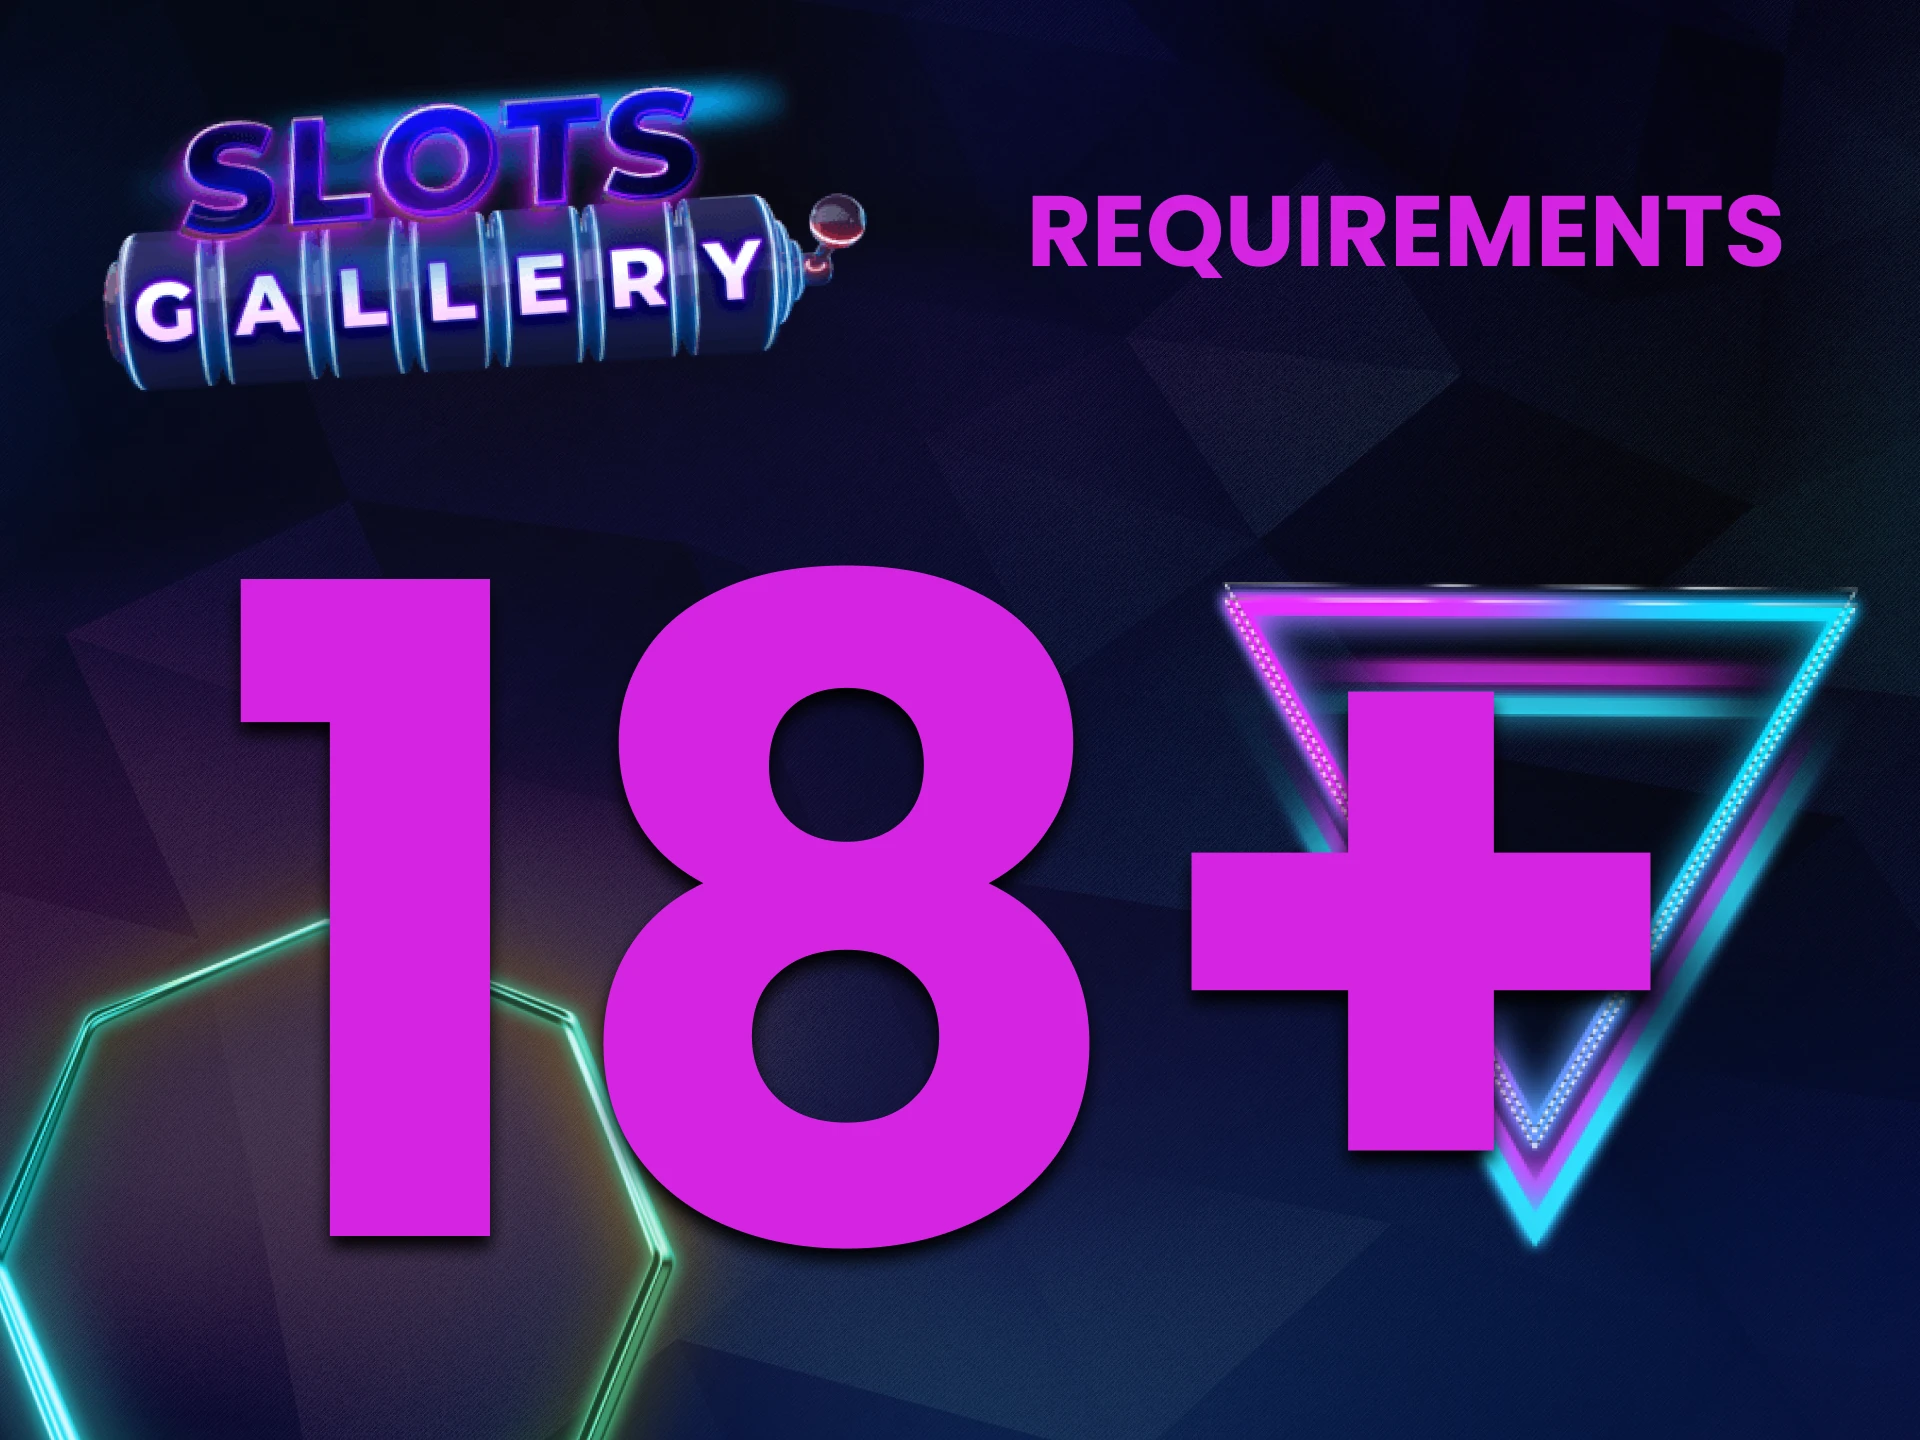 Find out what are the requirements for registering on Slots Gallery.